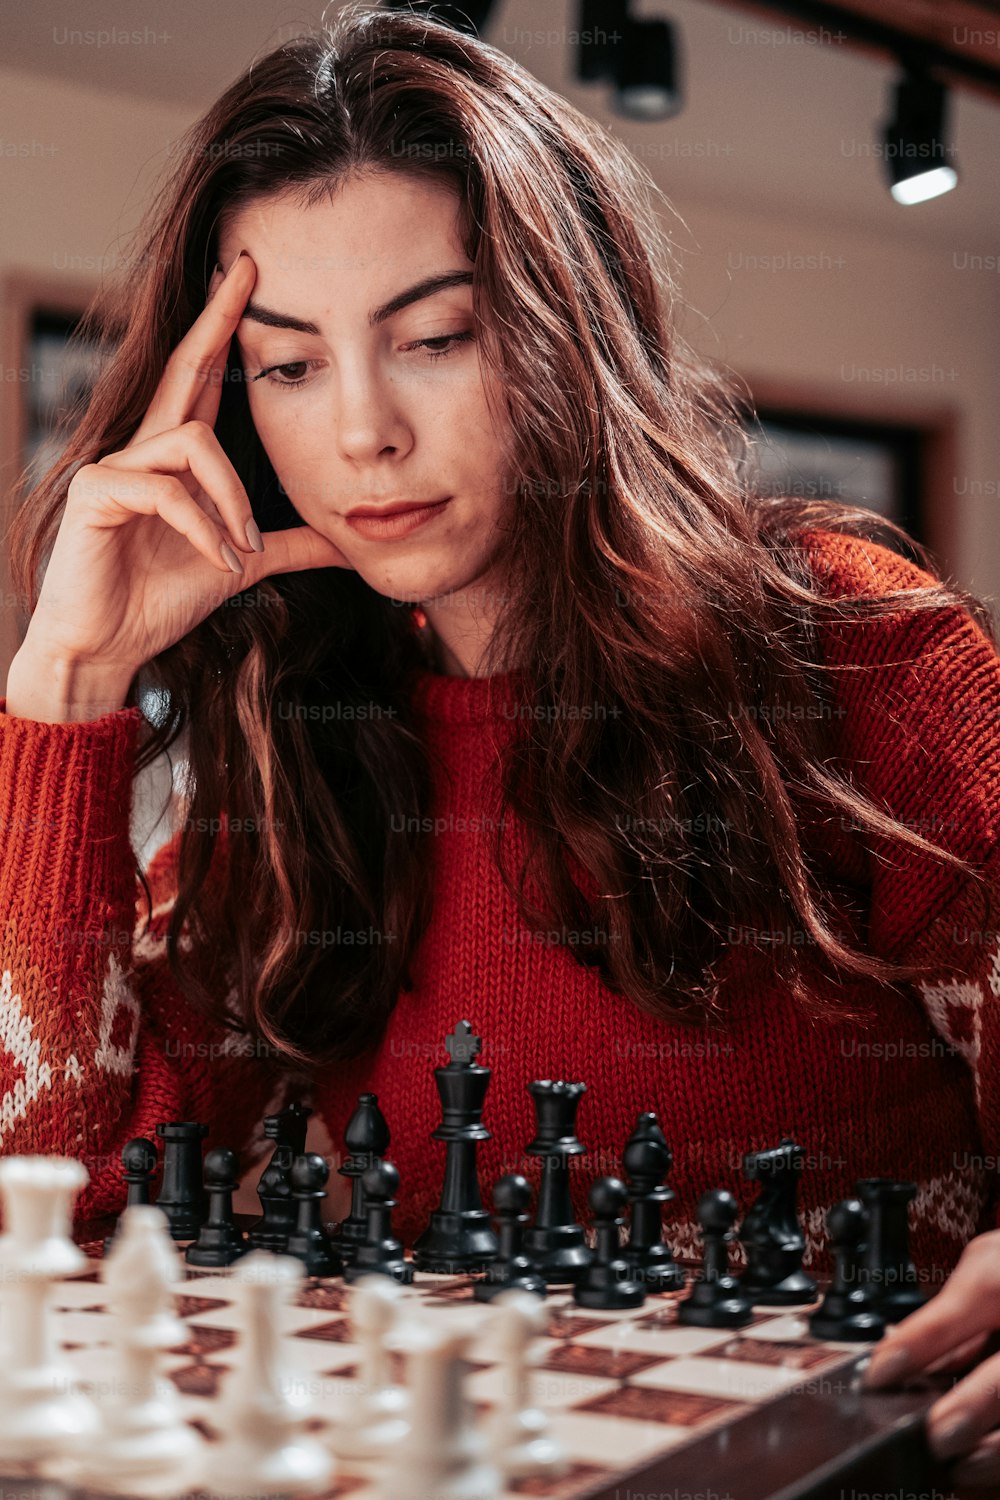 a woman with her hand on her face and a chess board